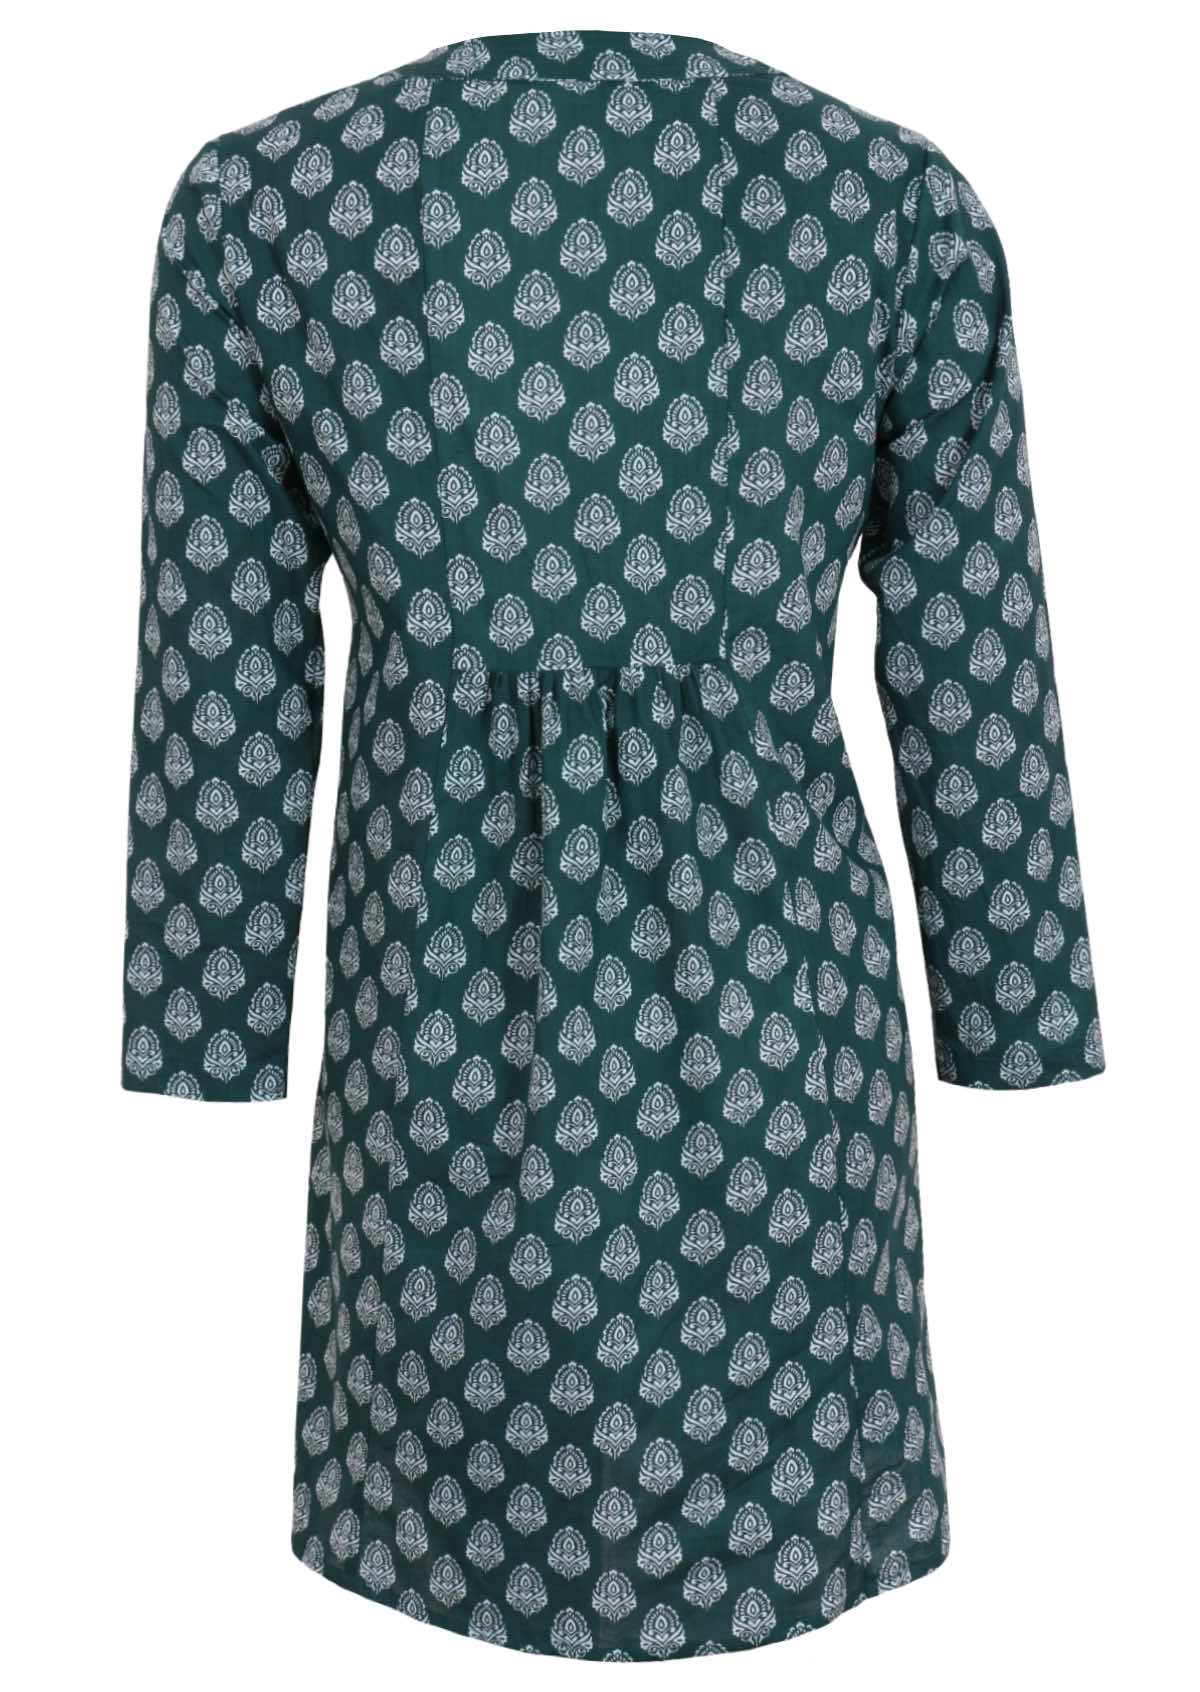 Cotton tunic with delicate white print on dark green base